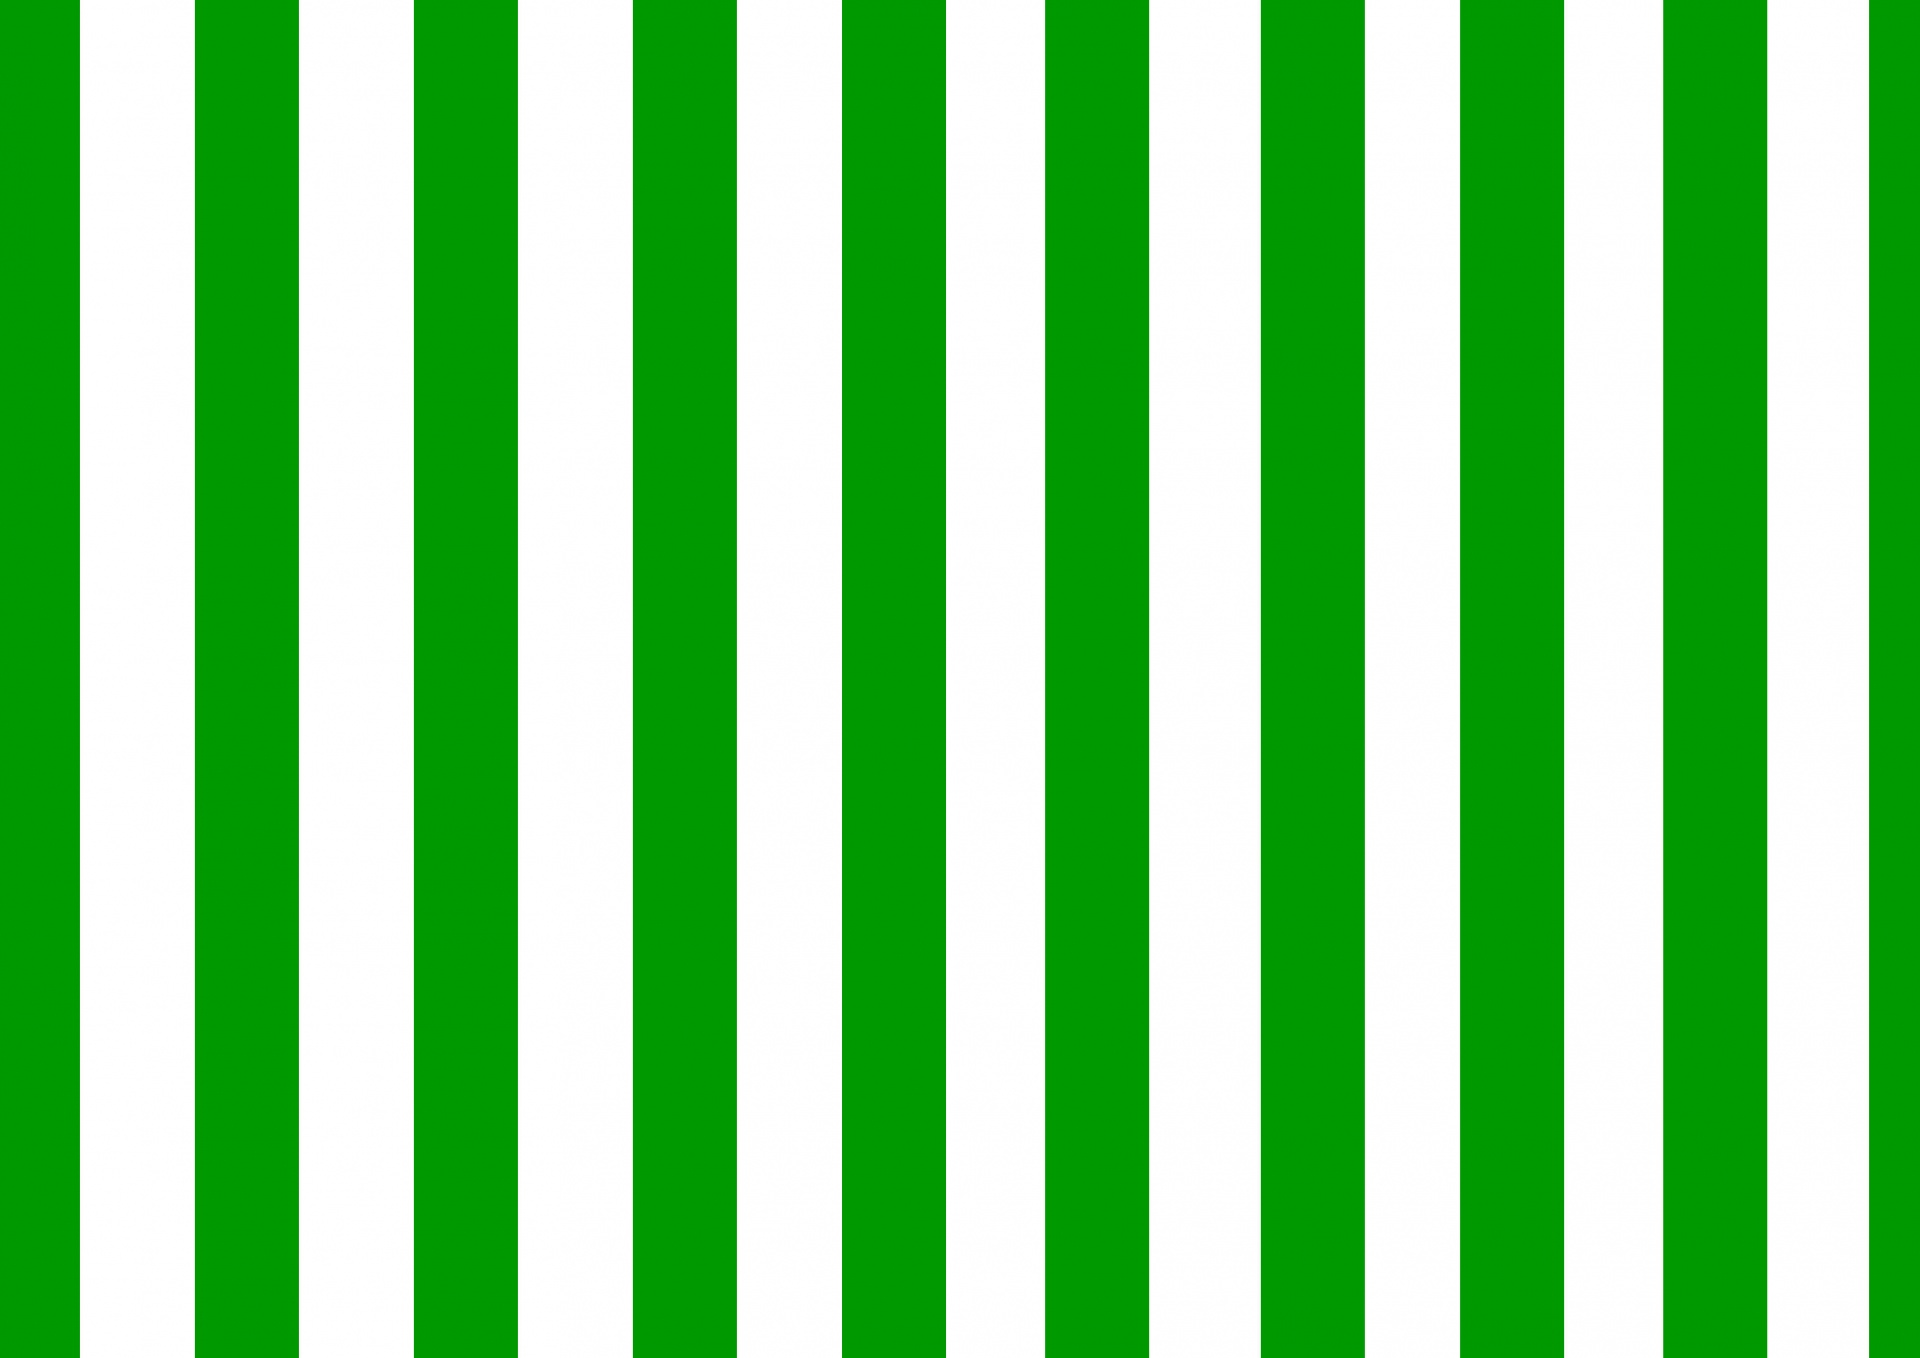 Download free photo of Green white,stripe,pattern,design,style - from ...